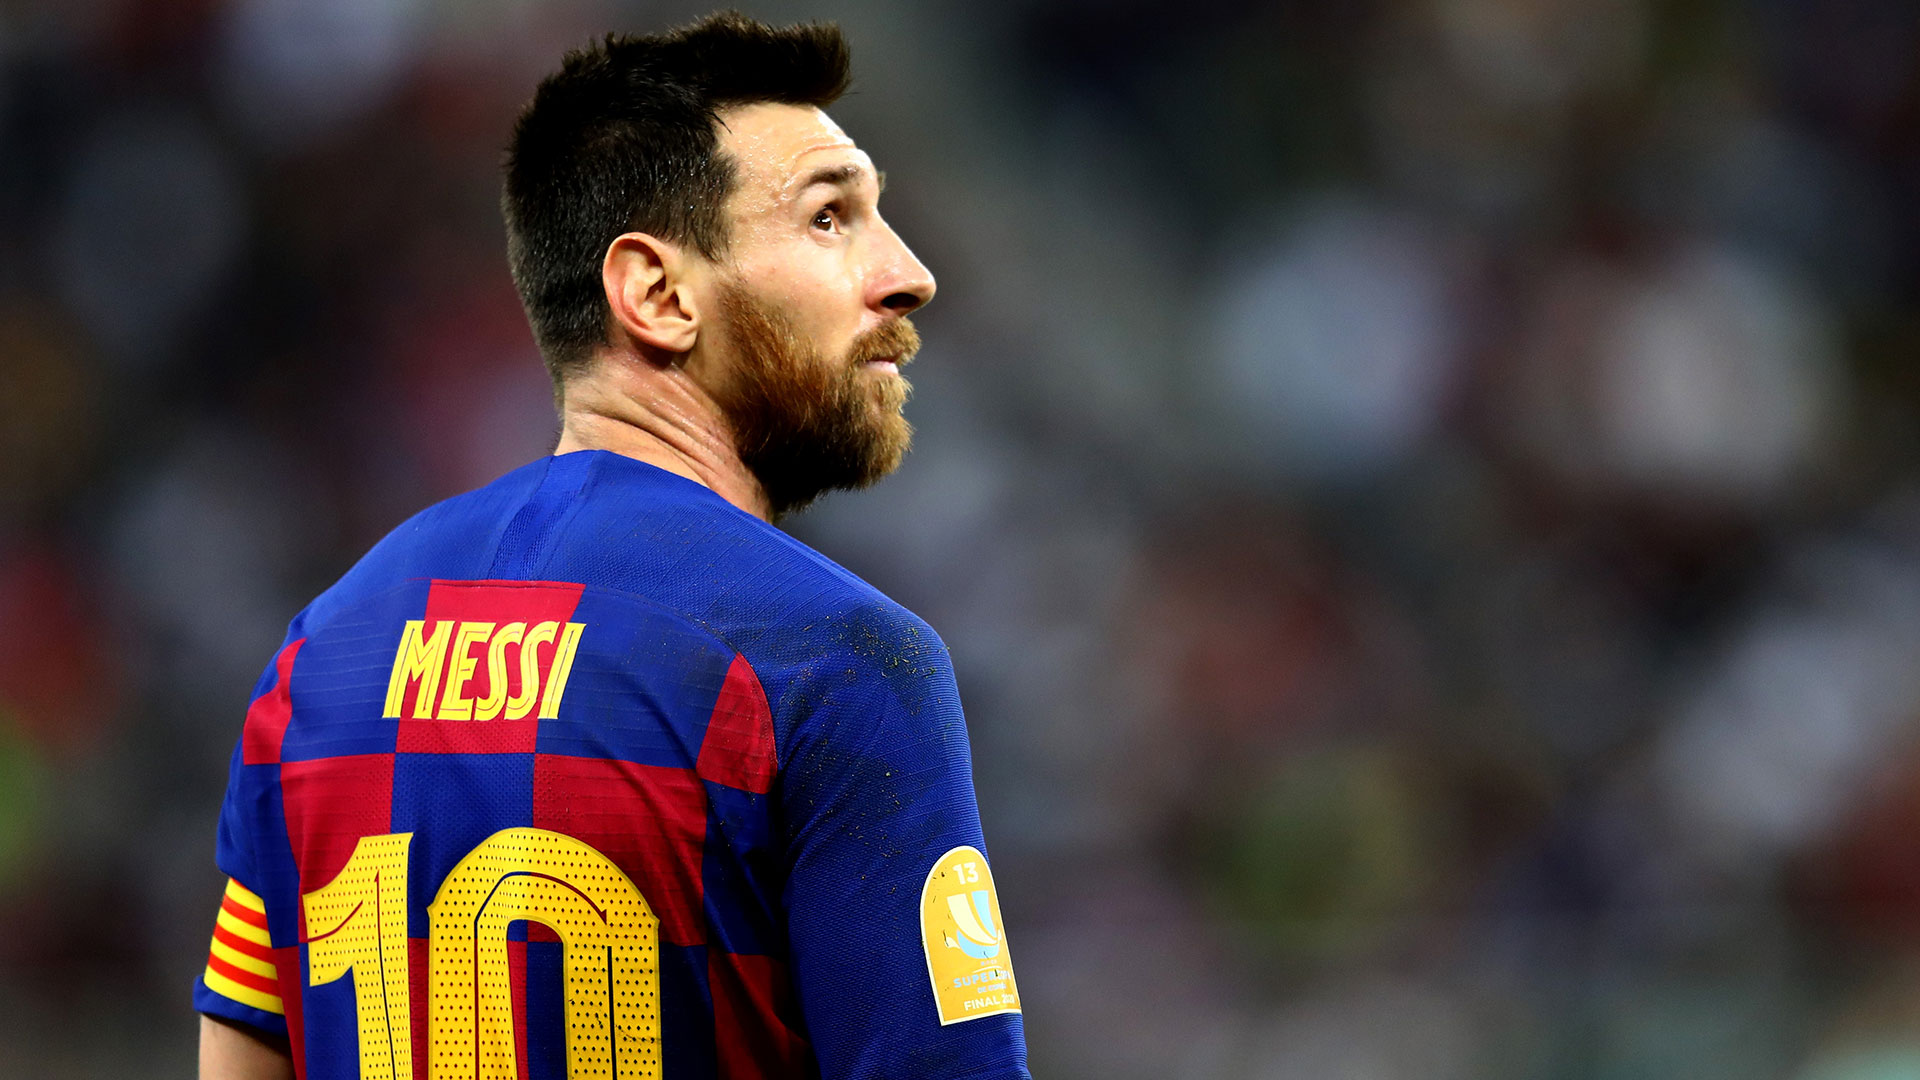 Messi is the best player in history – Xavi